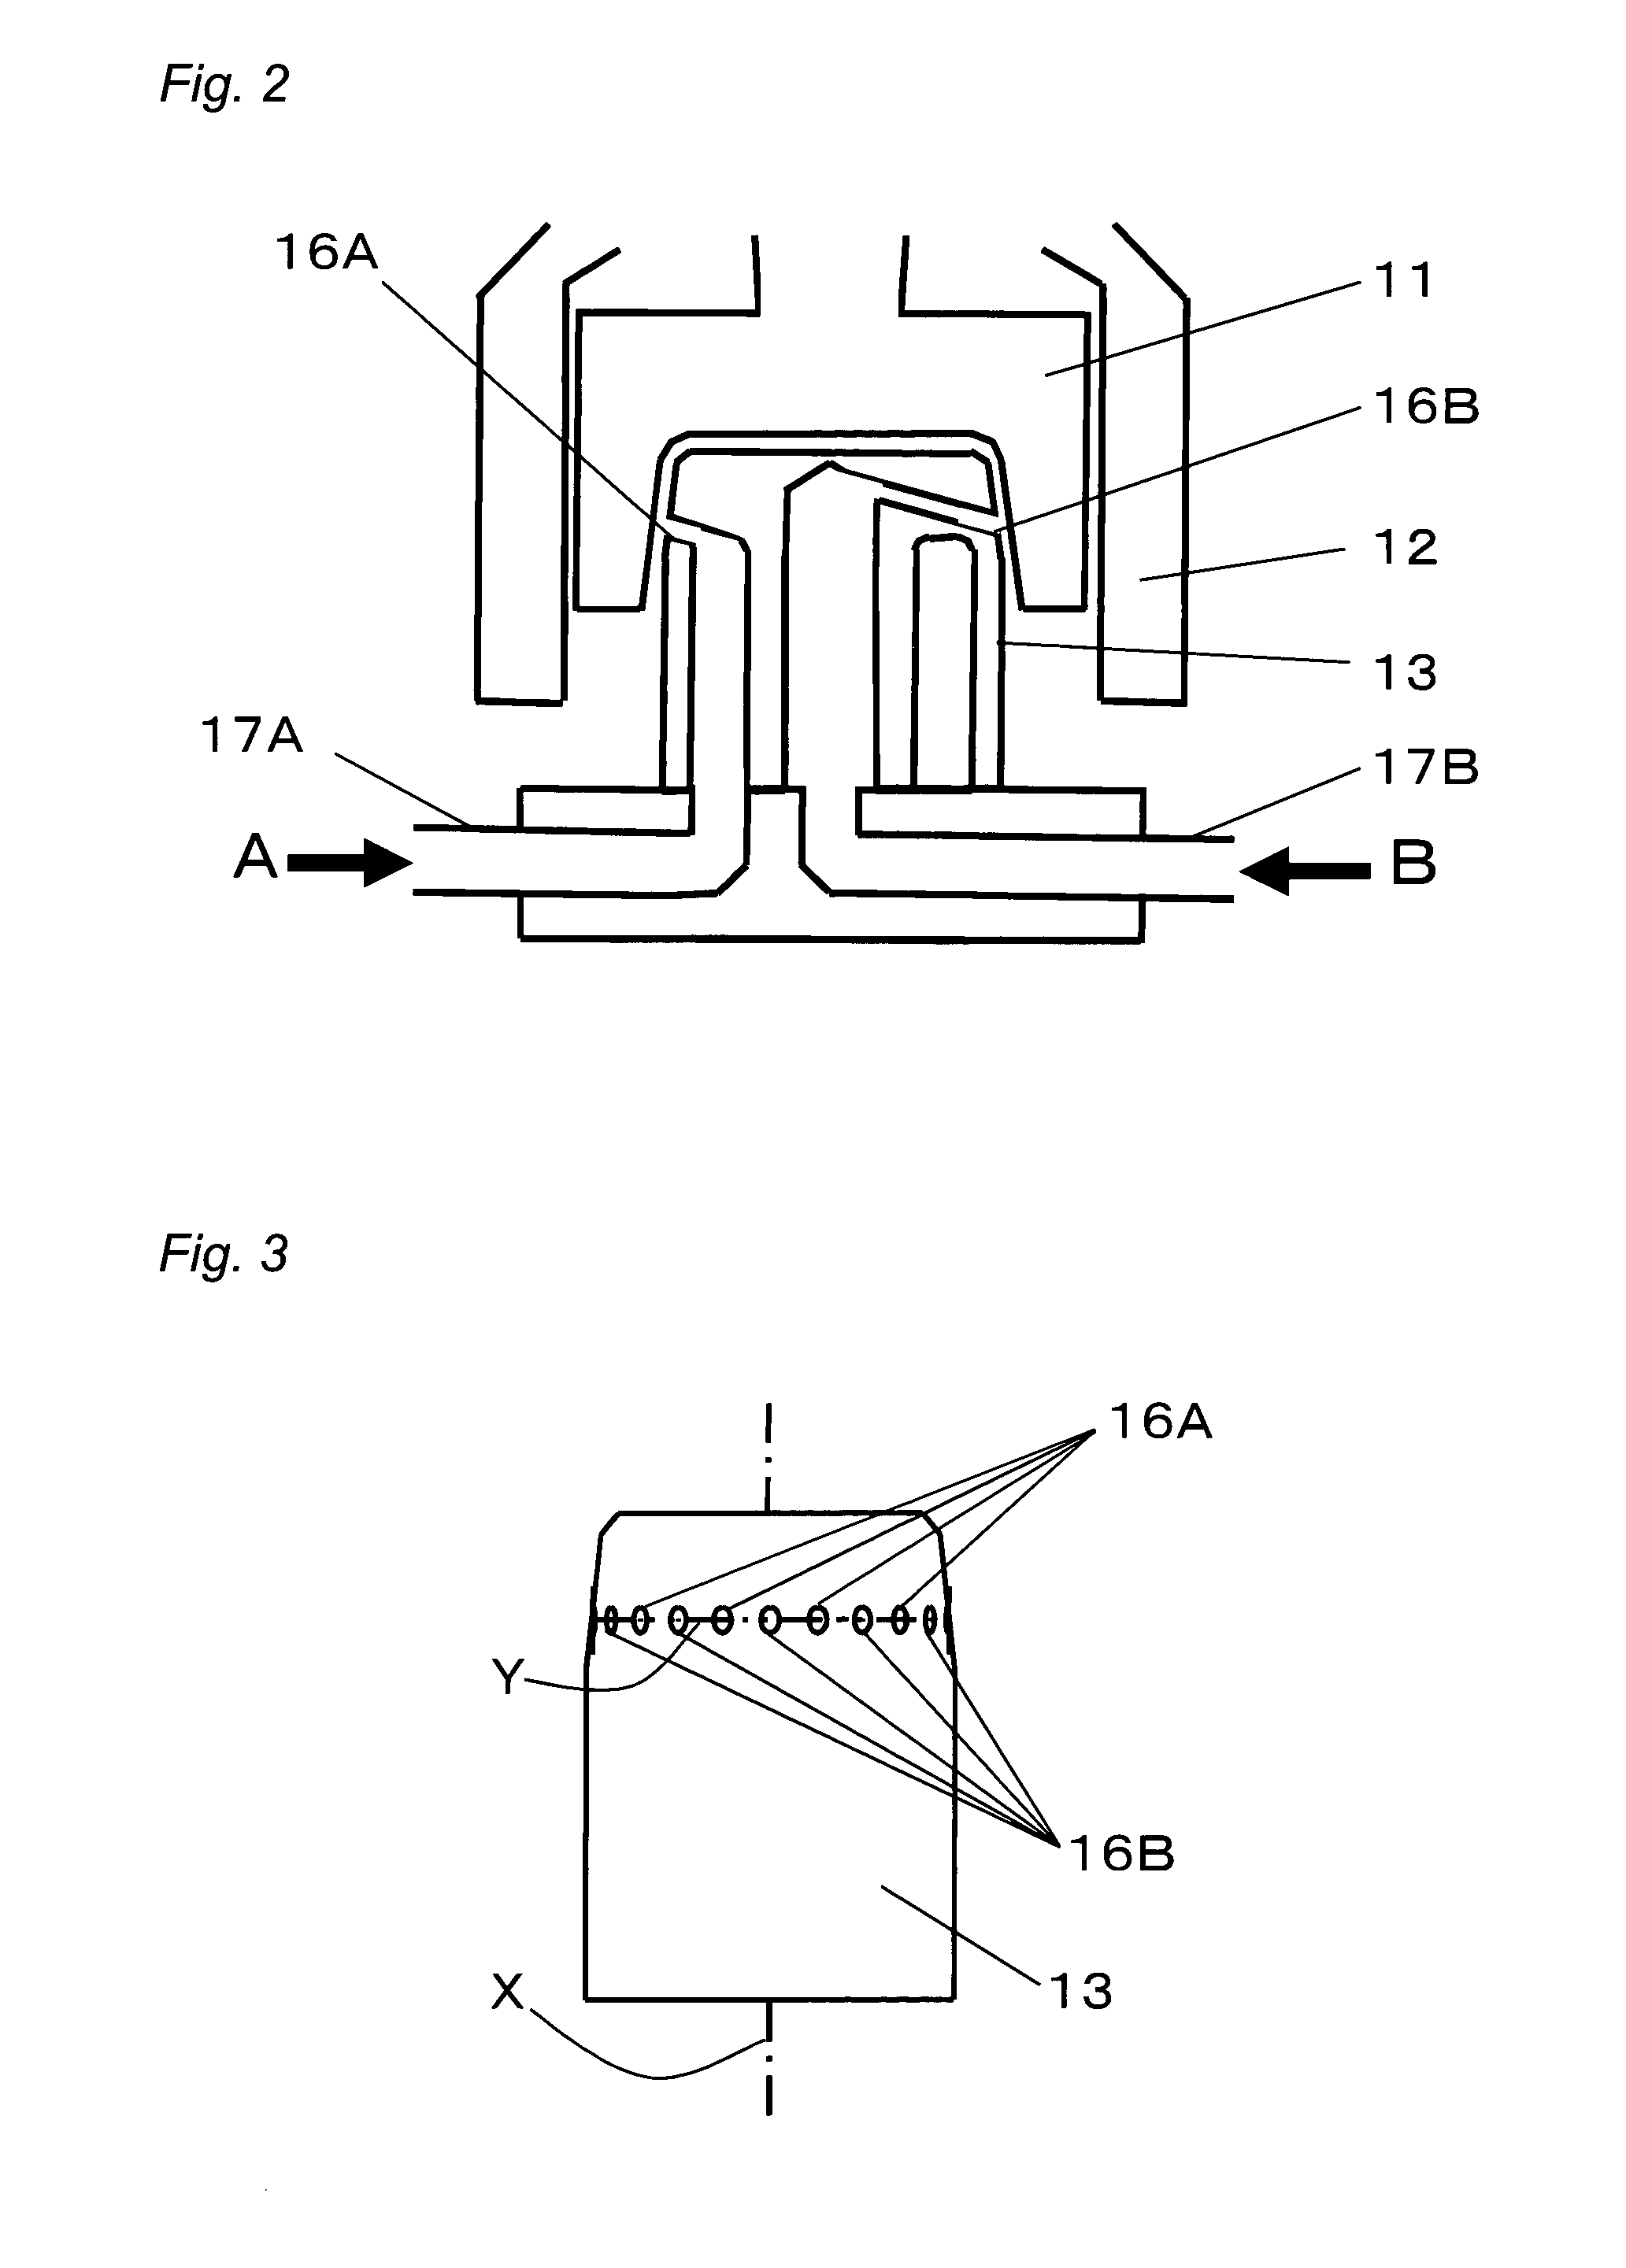 Catalyst support for purification of exhaust gas, catalyst for purification of exhaust gas using the same, and method for producing the catalyst support for purification of exhaust gas